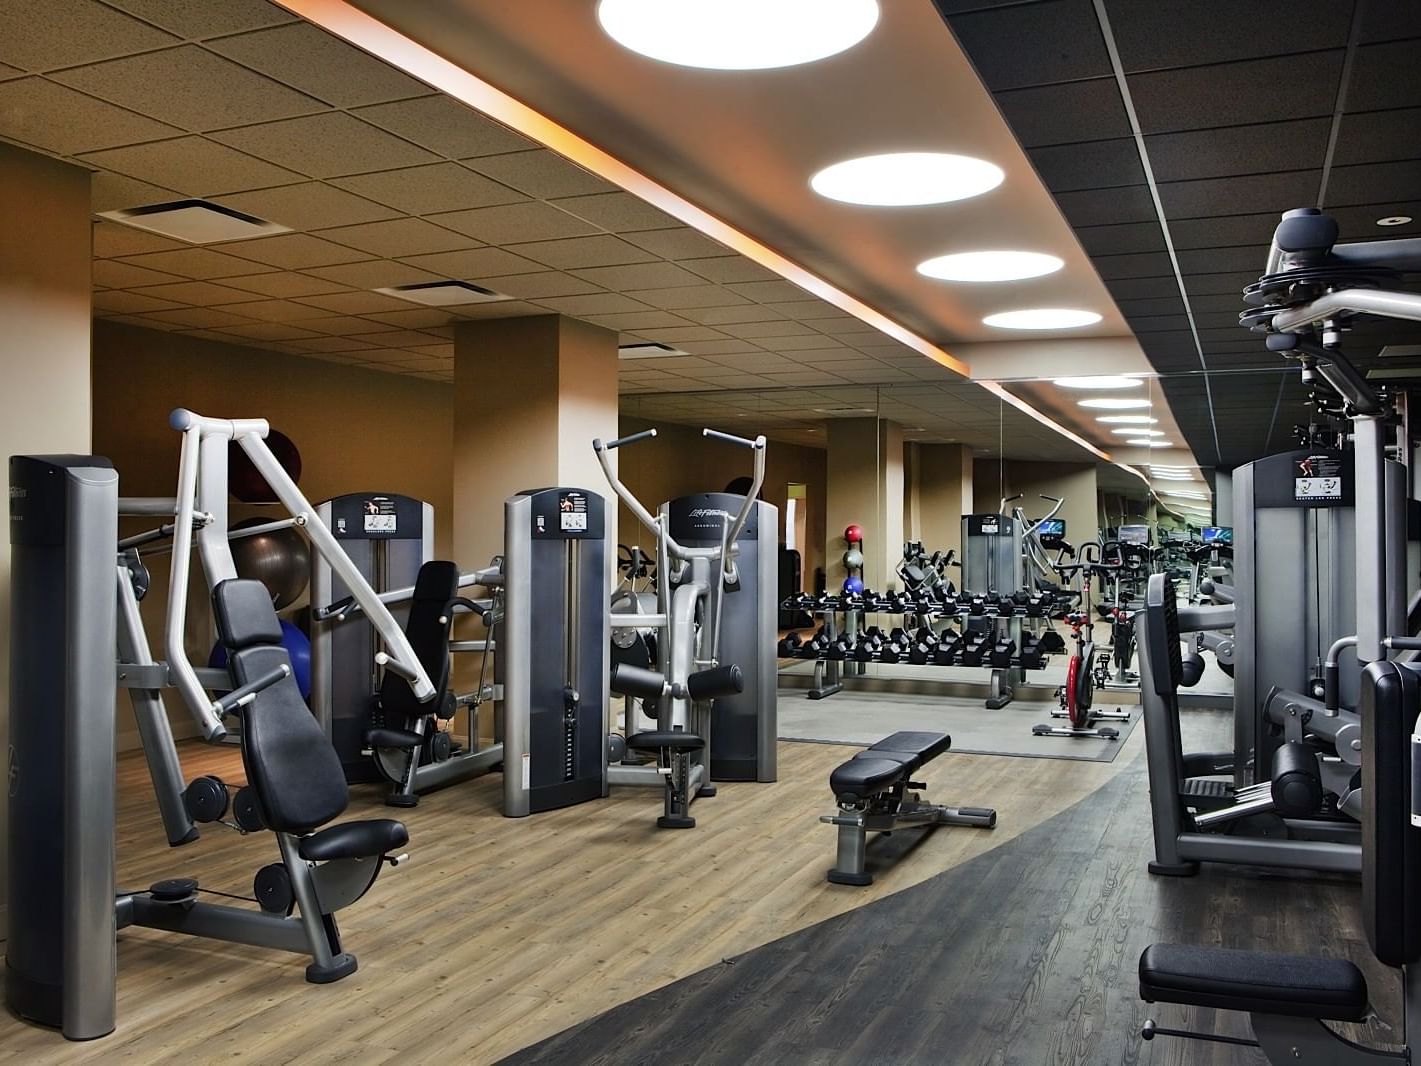 Interior of the Fully equipped fitness center at Ocean Place